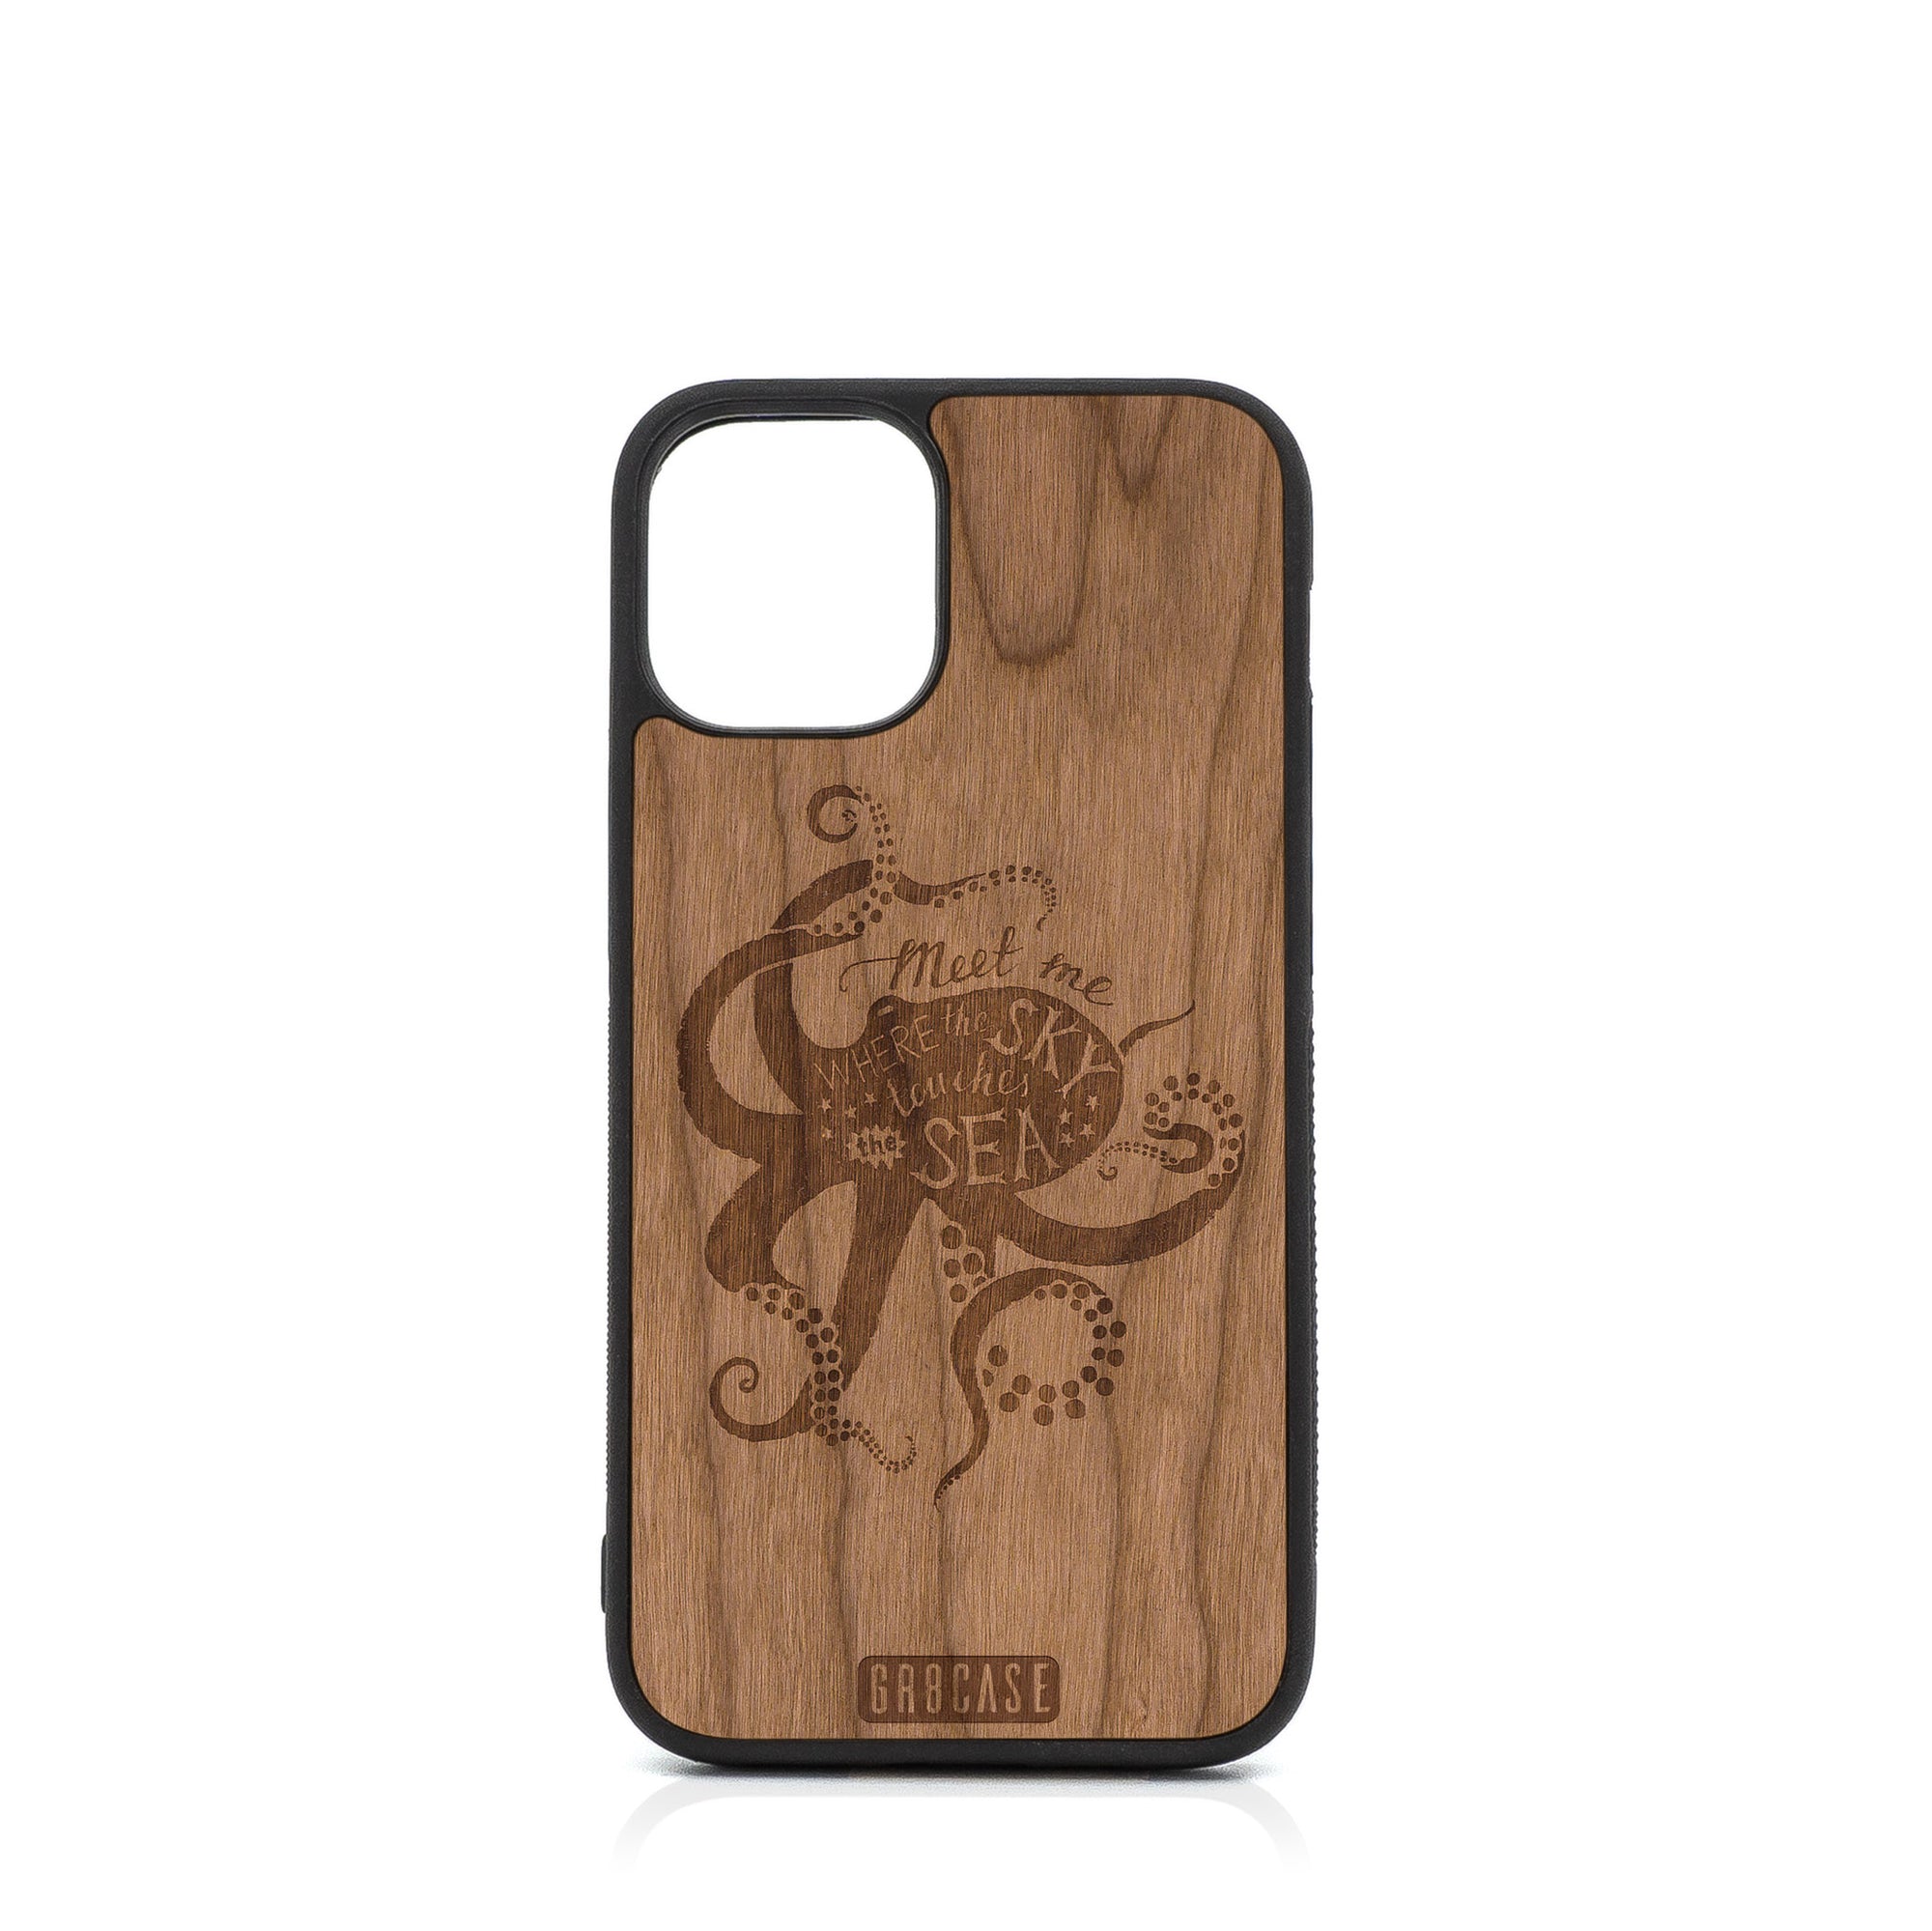 Meet Me Where The Sky Touches The Sea (Octopus) Design Wood Case For iPhone 12 Mini